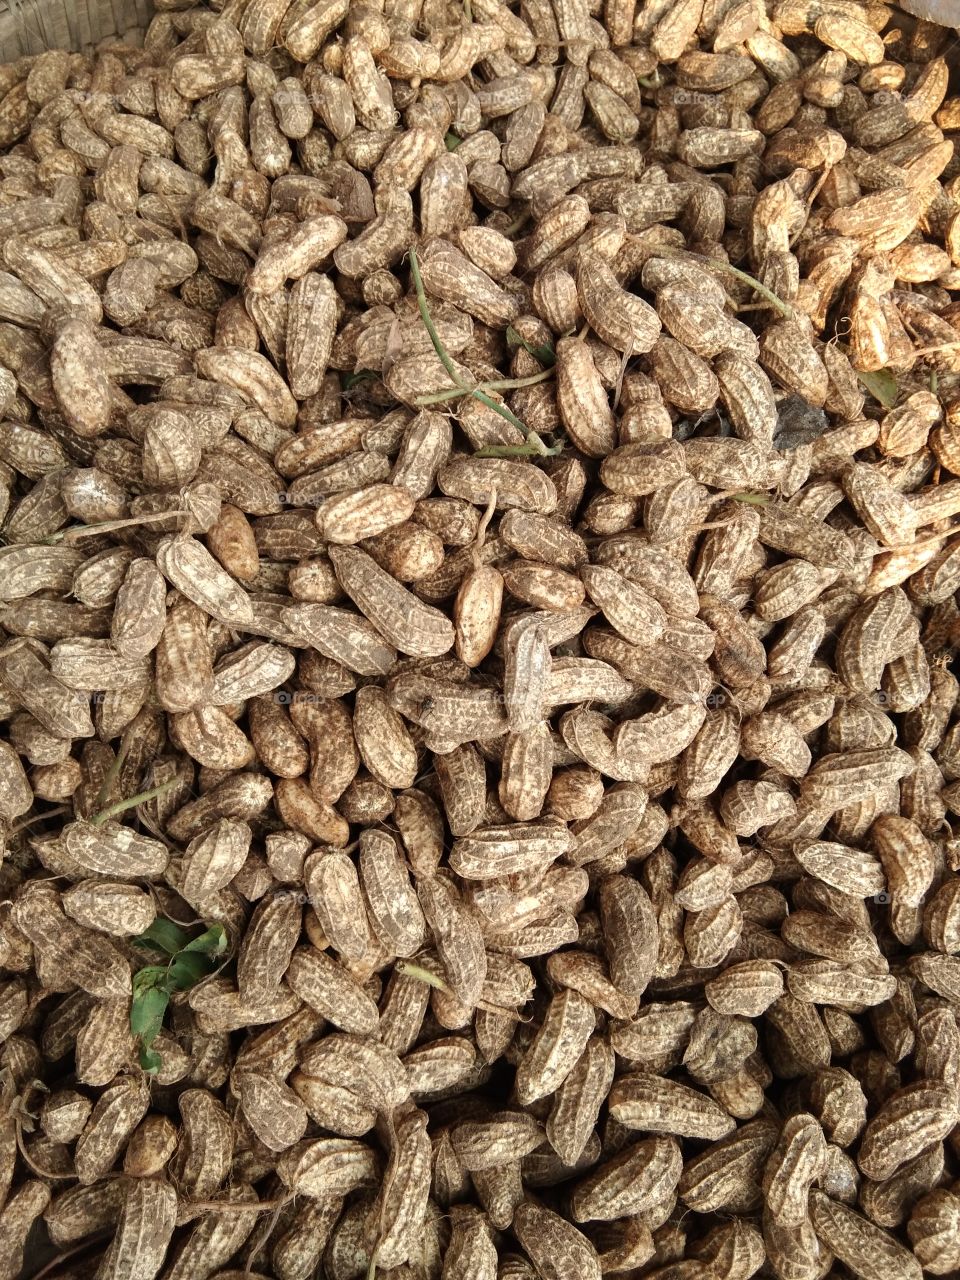 peanuts are harvested from the fields